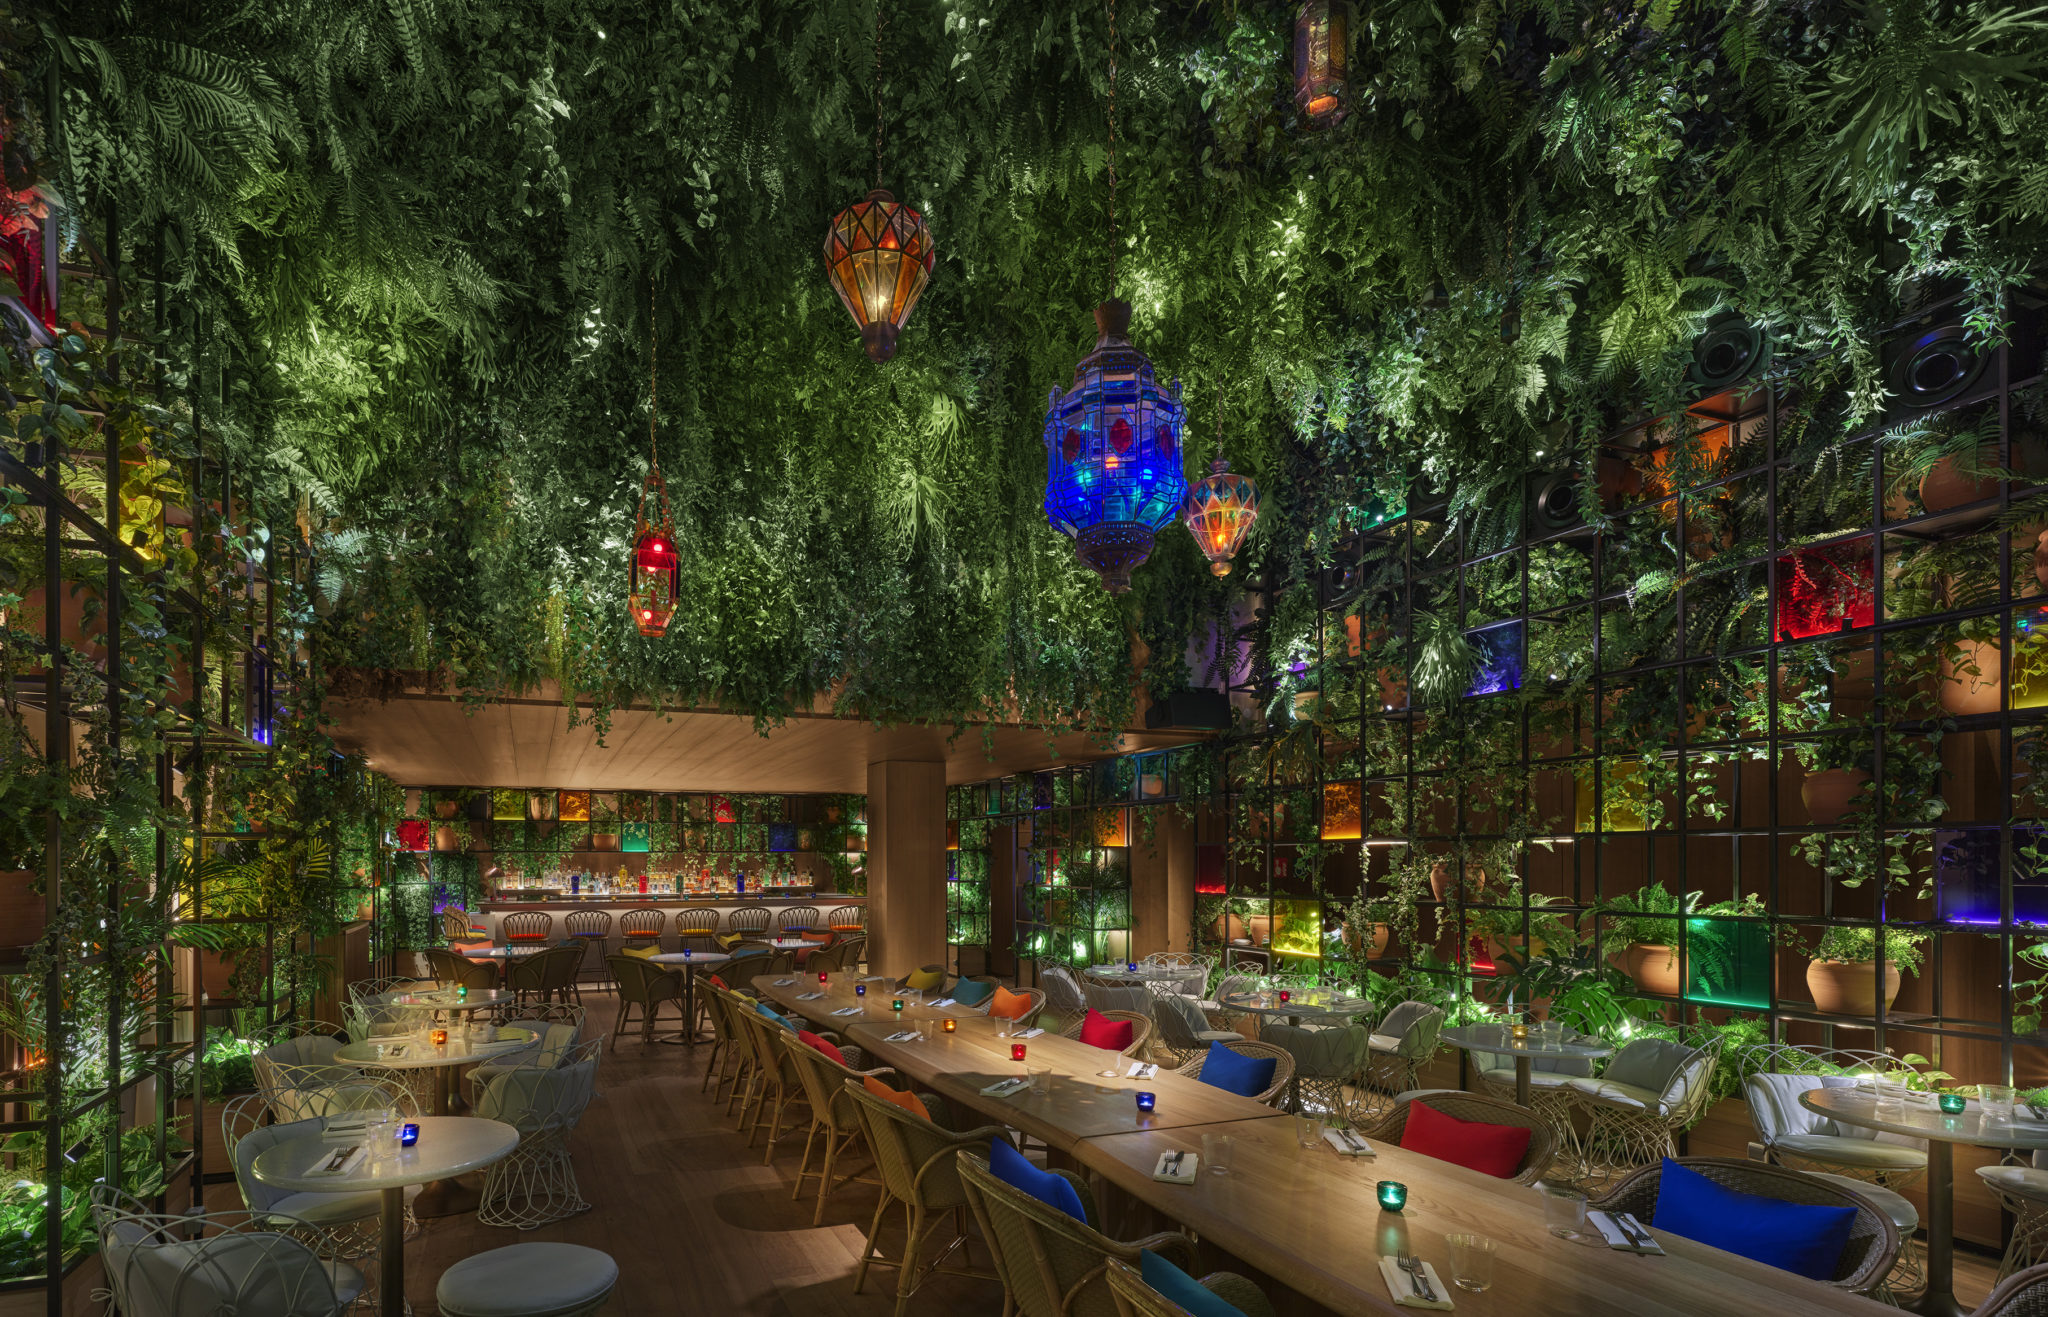 Dining area with hanging garden and colorful lanterns at night